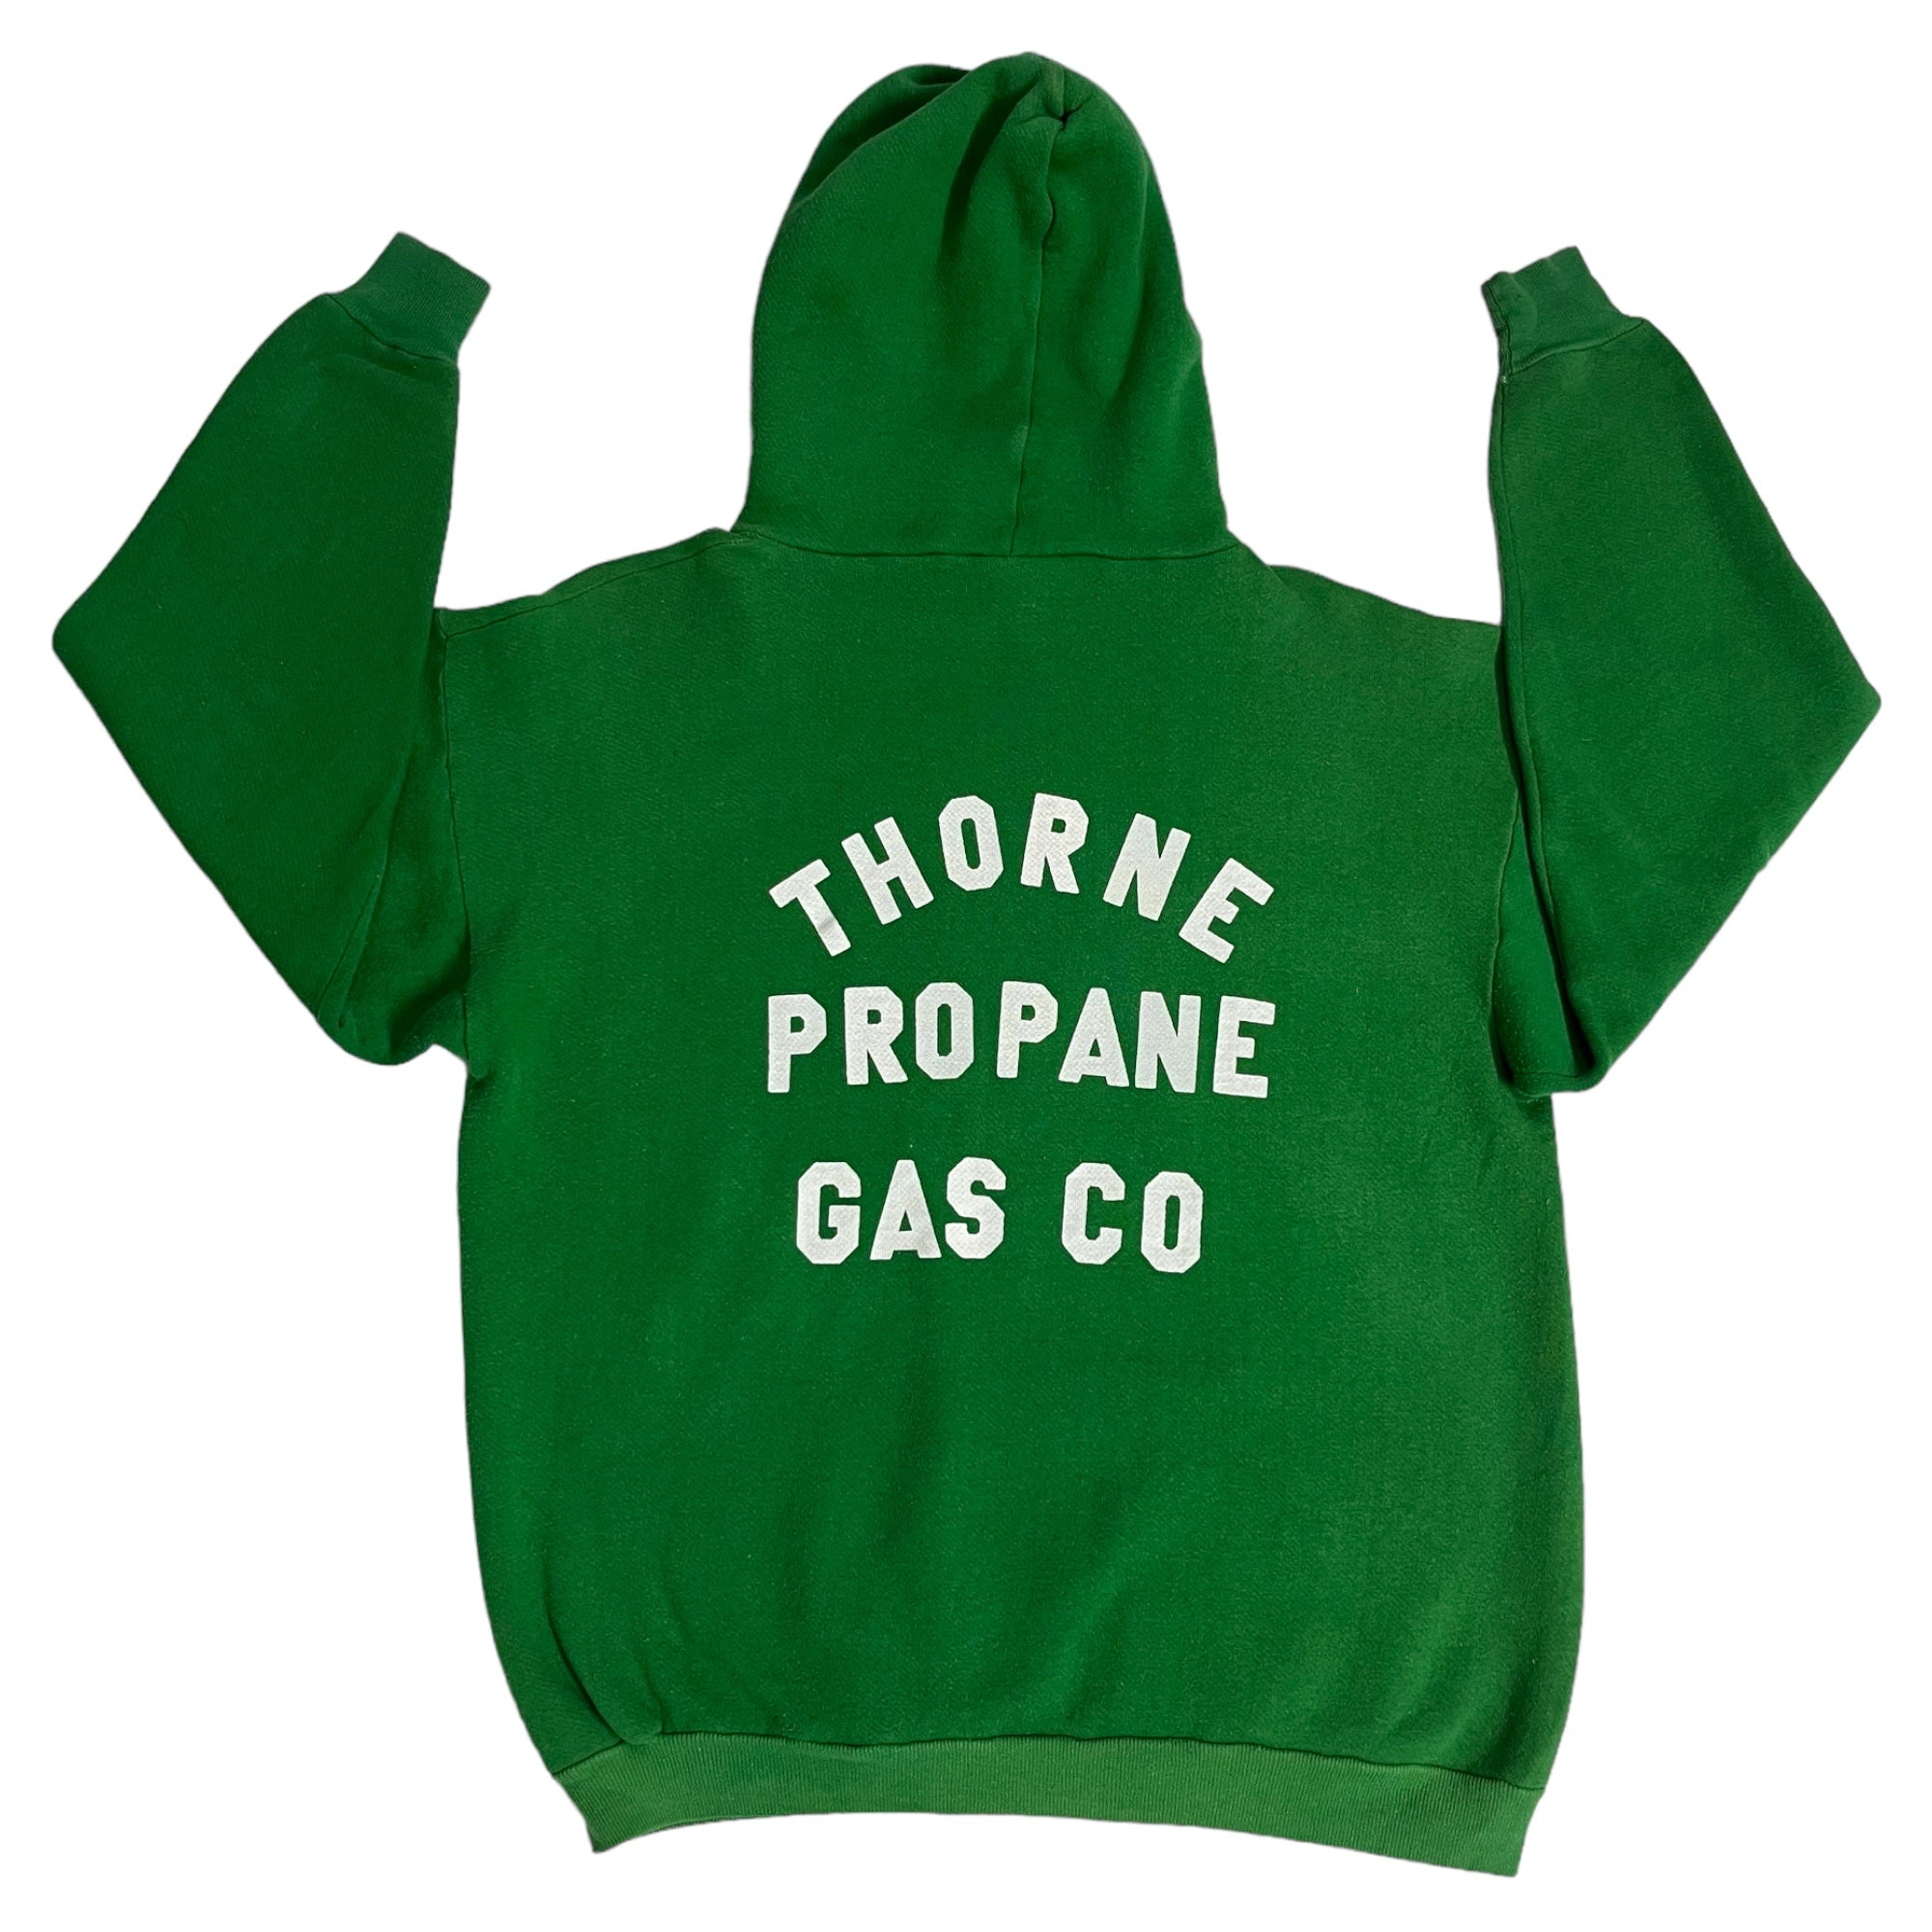 1970s Russell Gold Tag, Thorne Propane Hooded Sweatshirt - Kelly Green - L/XL